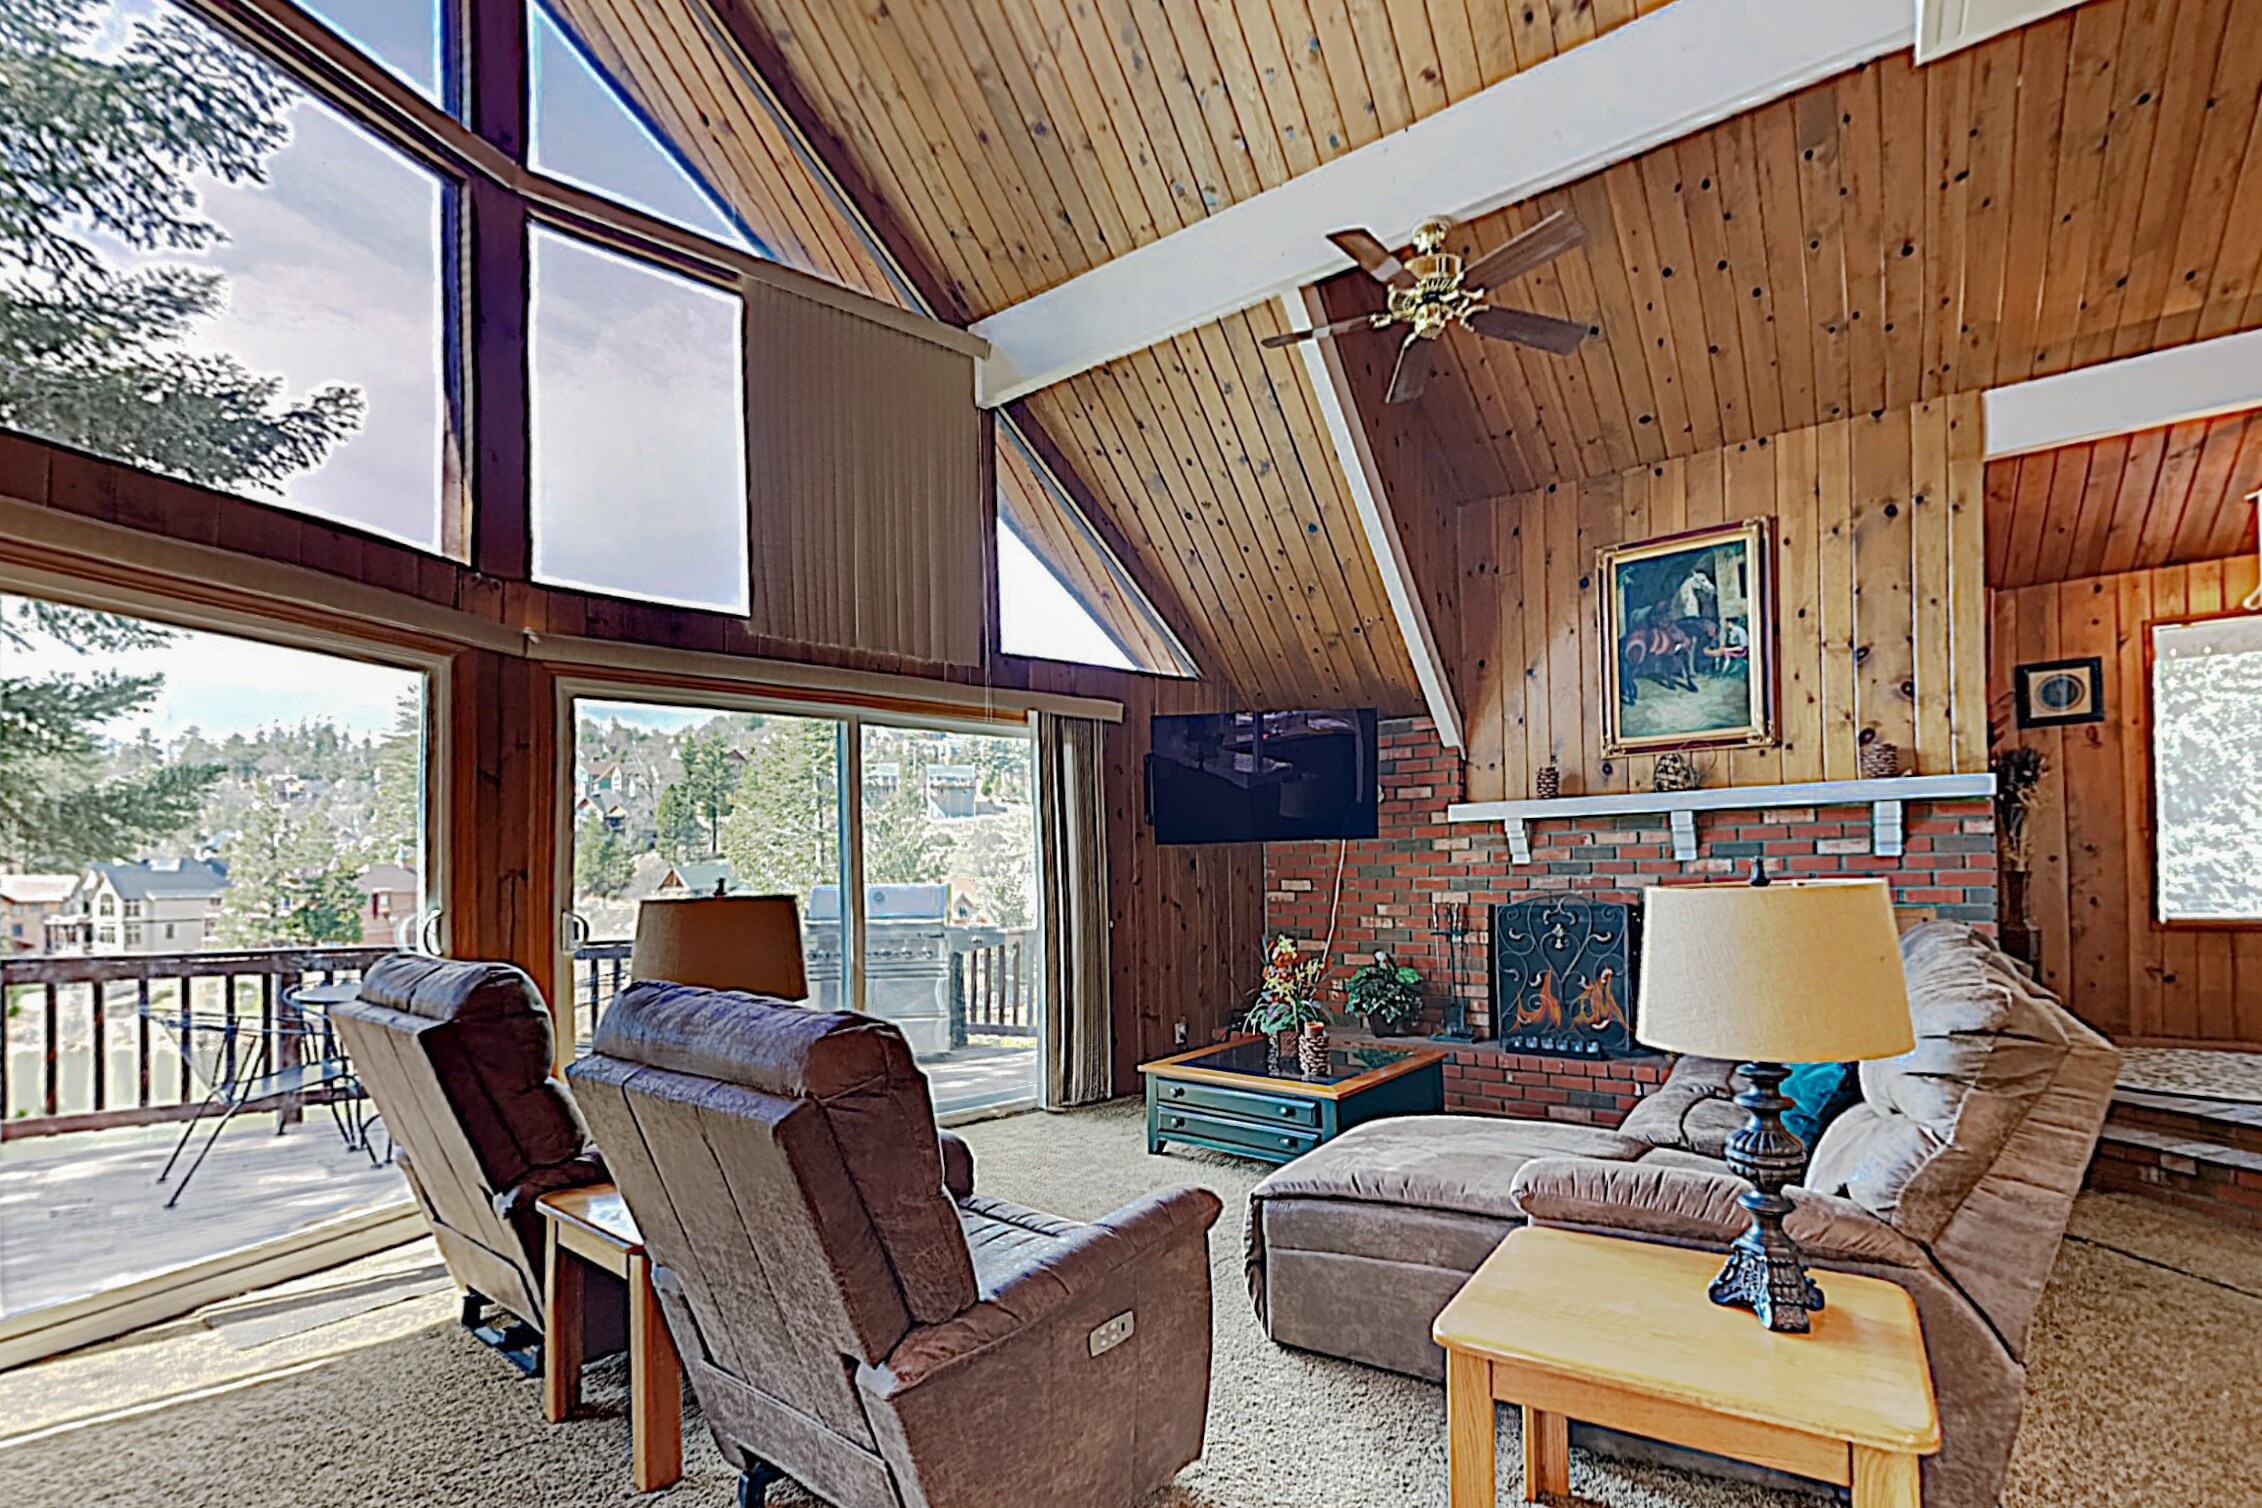 Unwind into vacation mode in the spacious living area, featuring soaring vaulted ceilings.